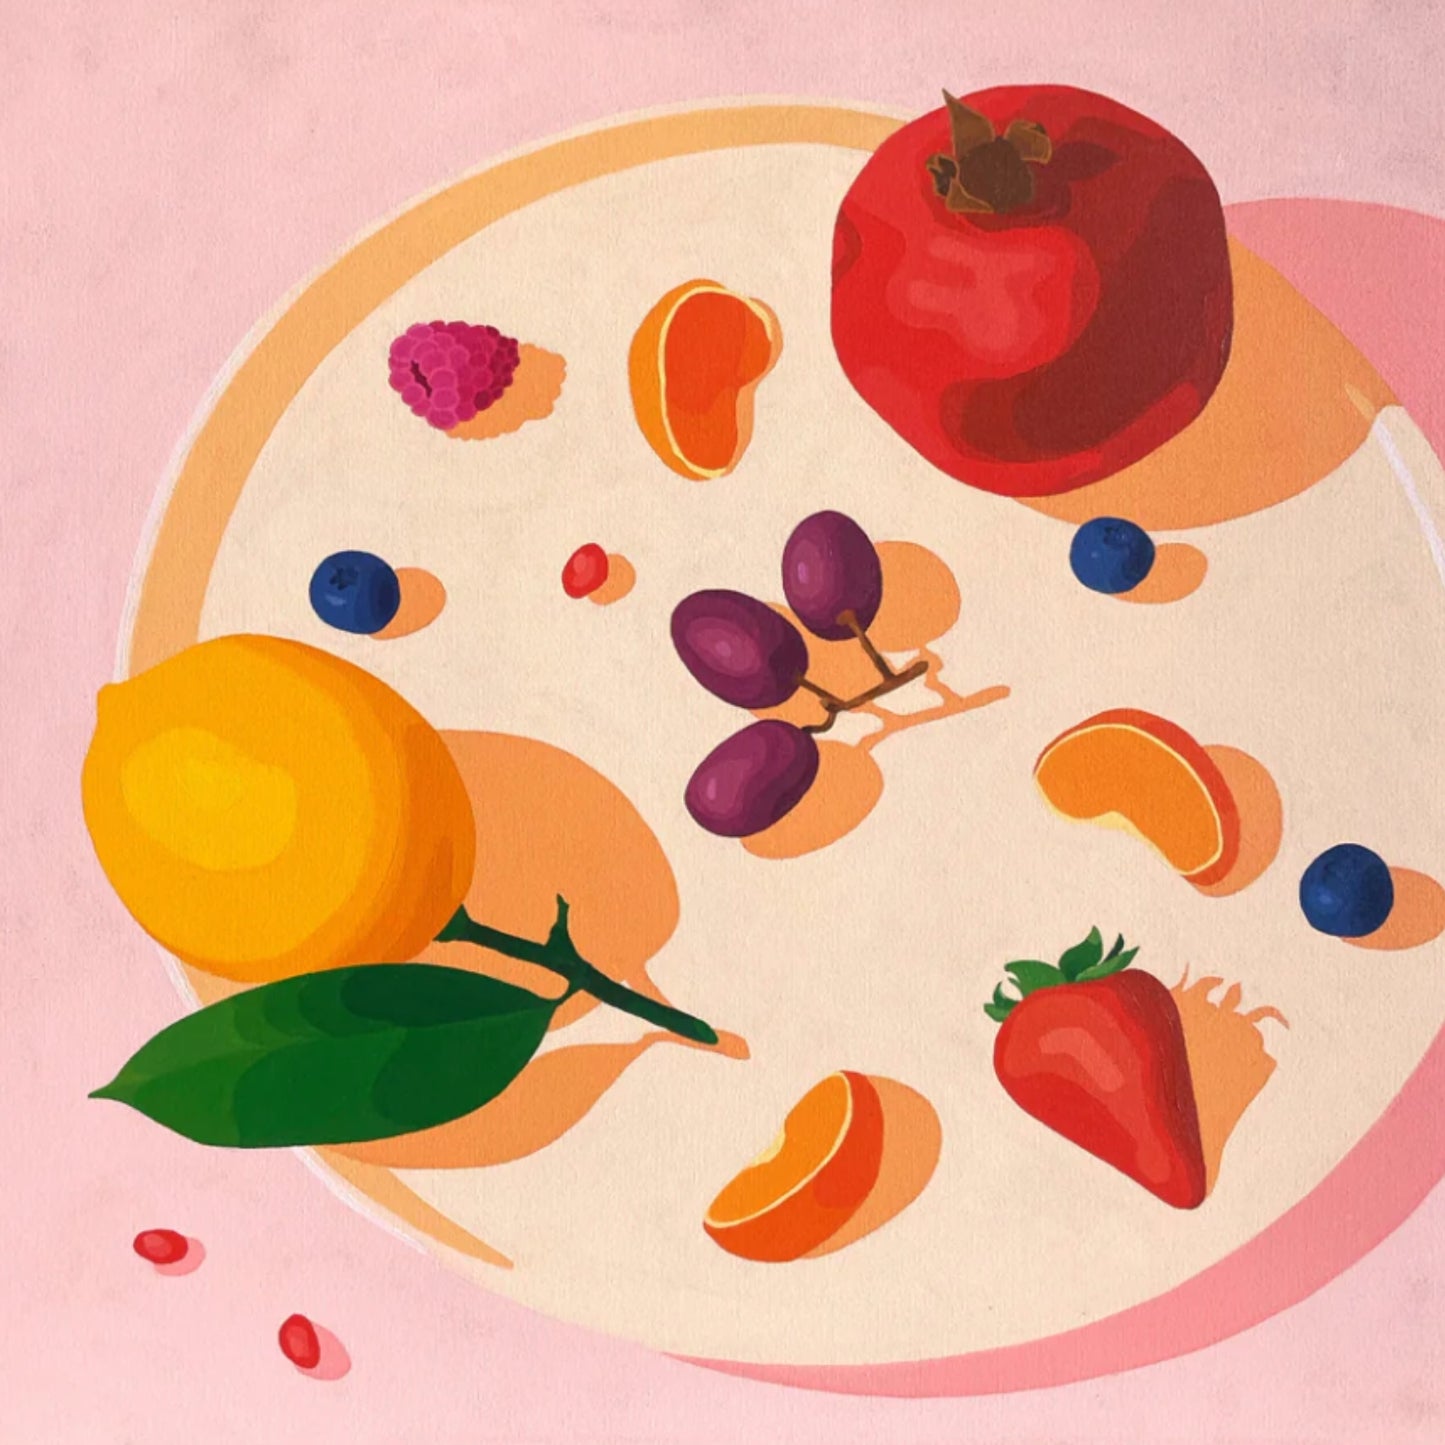 fine art print of an original oil painting of a pomegranate, grapes, lemon, strawberry, mandarine slices, blueberries and pomegranate seeds on a vanilla cream plate on a soft pink background